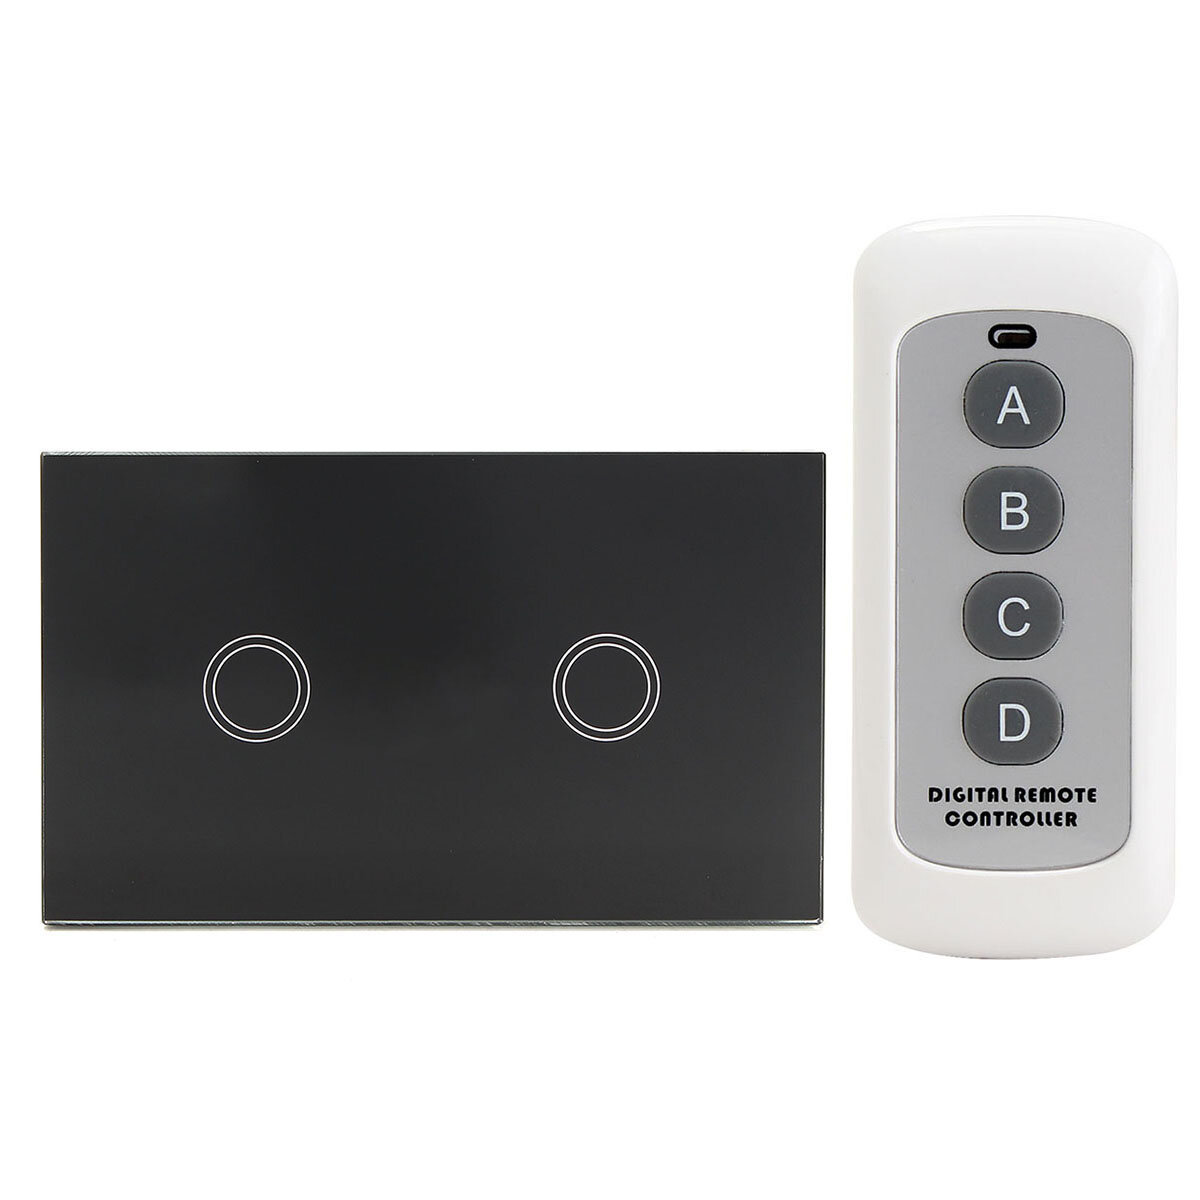 1 Way 2 Gang Crystal Glass Remote Panel Touch LED Light Switch Controller With Remote Control COD